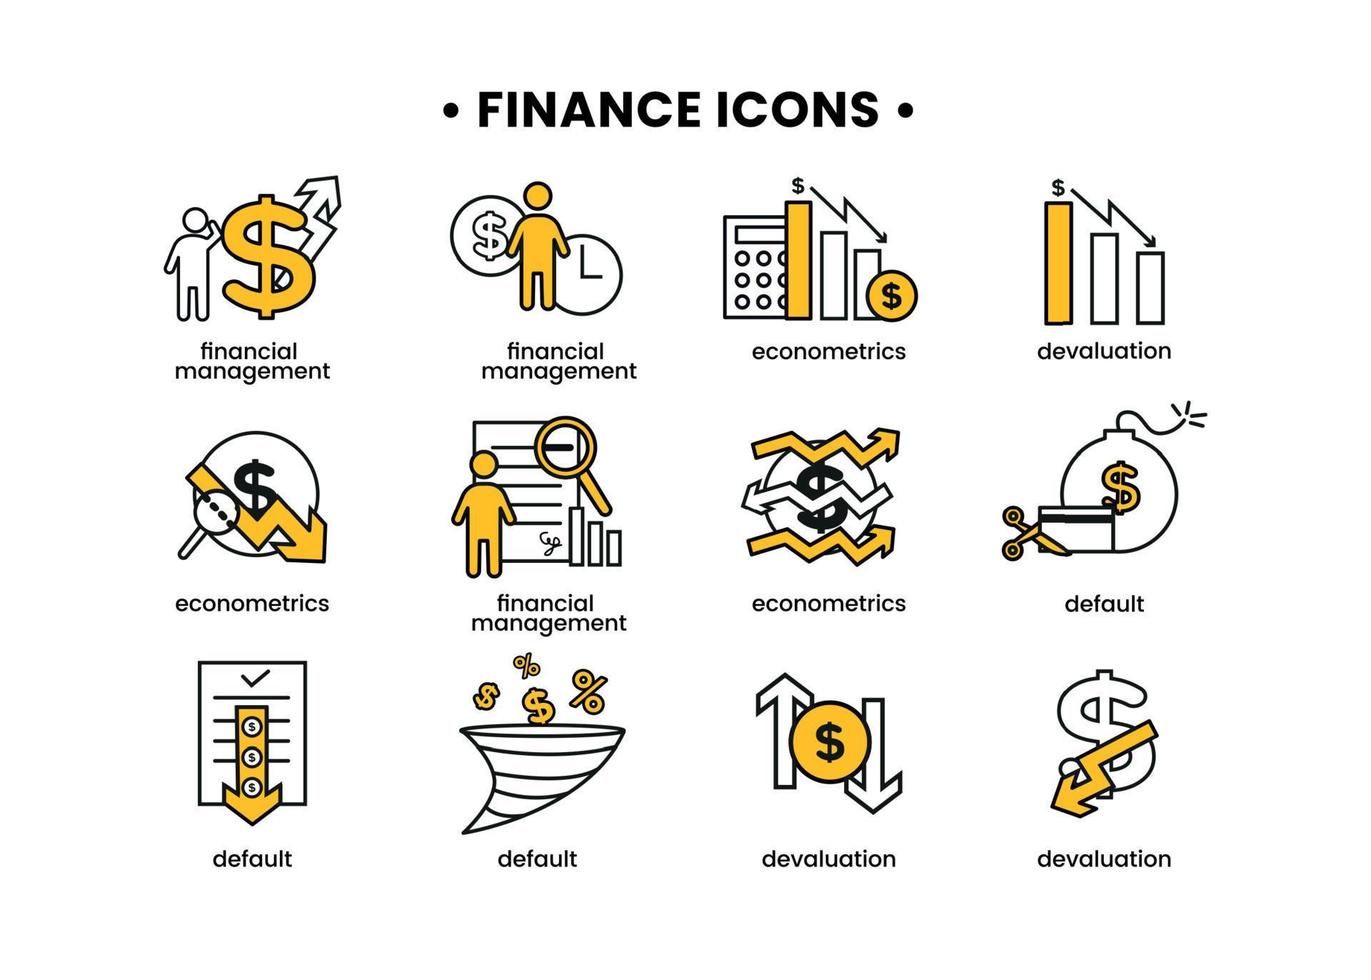 Finance icons set. Vector illustration of financial management, econometrics, devaluation, default. A dollar sign, next to which is the silhouette of a man, followed by an up arrow.